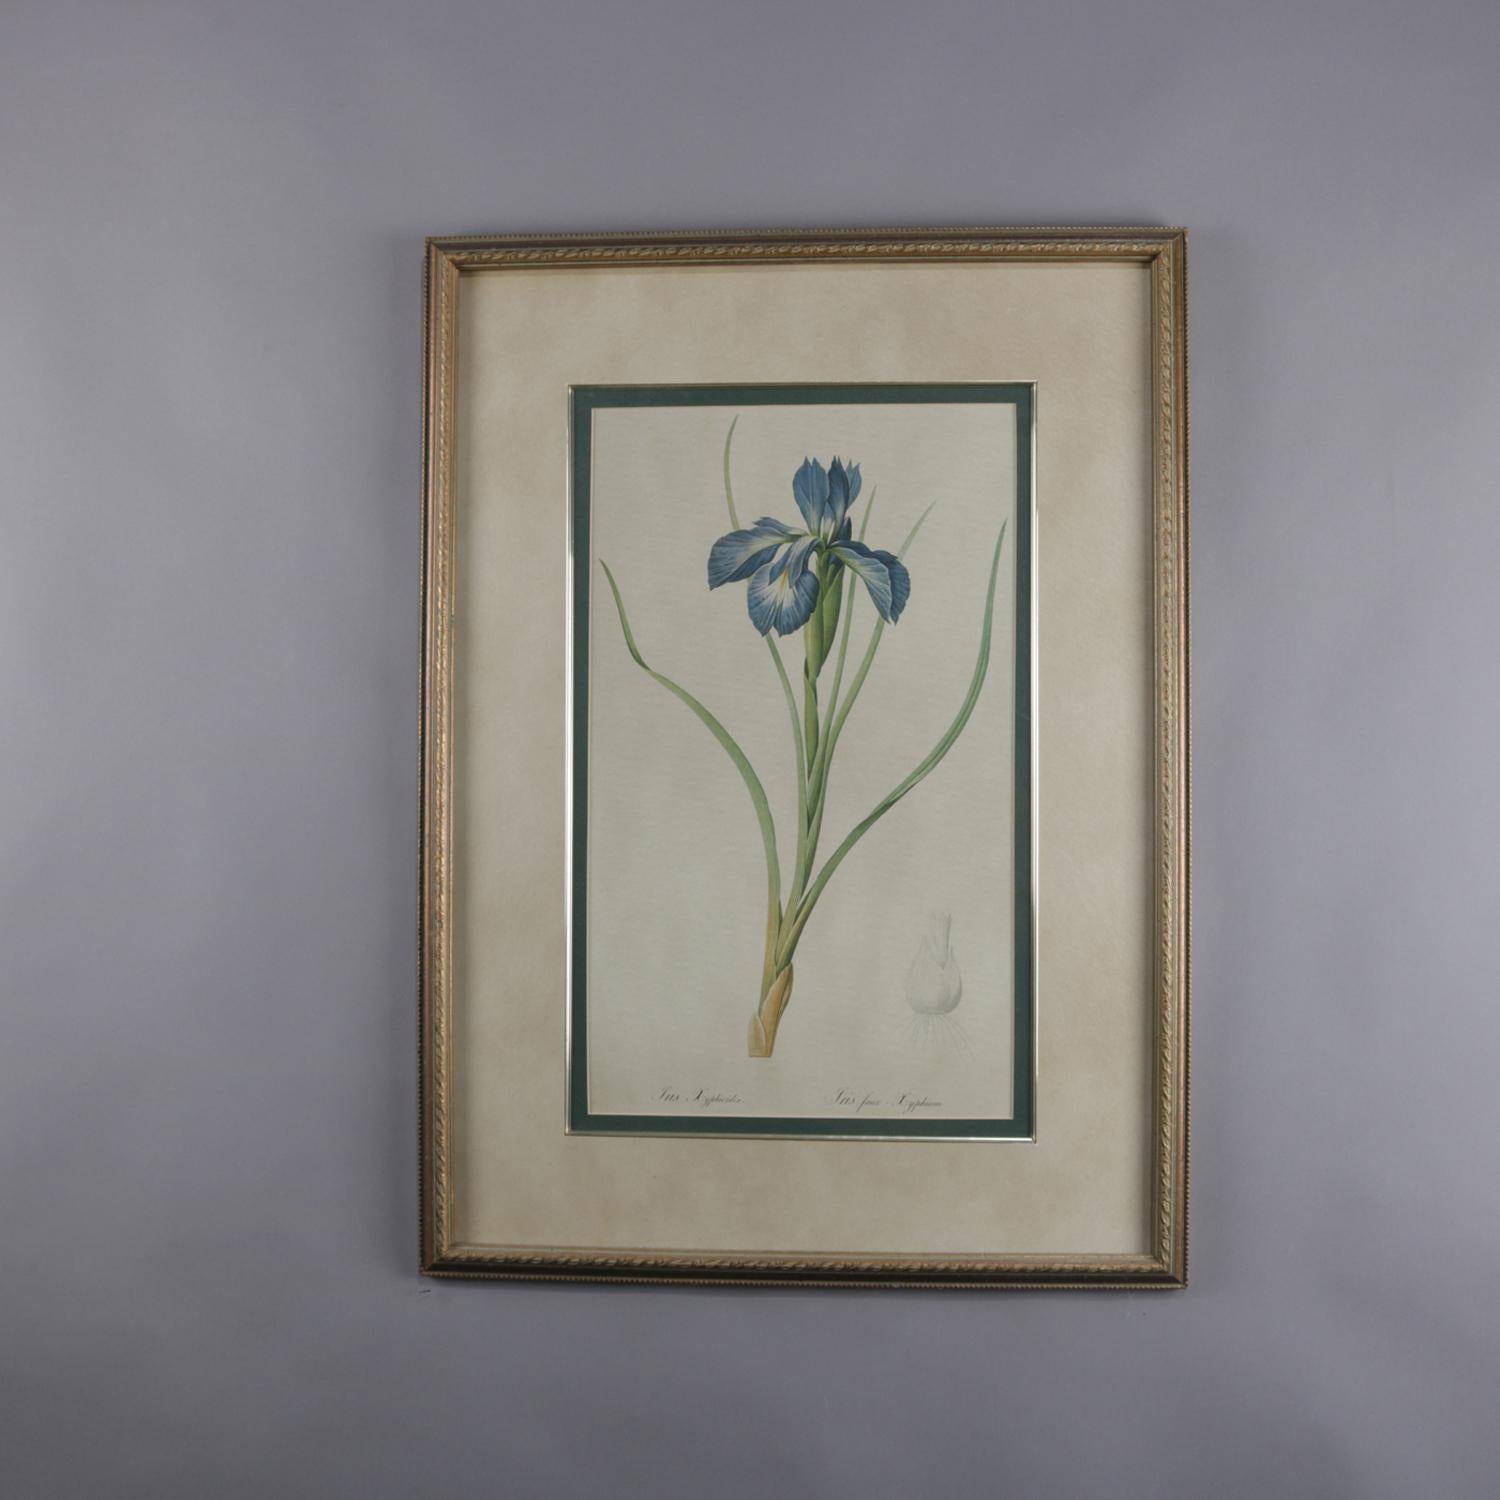 Set of three framed botanical prints depict flowers including Iris, circa 1990

***DELIVERY NOTICE – Due to COVID-19 we are employing NO-CONTACT PRACTICES in the transfer of purchased items.  Additionally, for those who prefer to delay